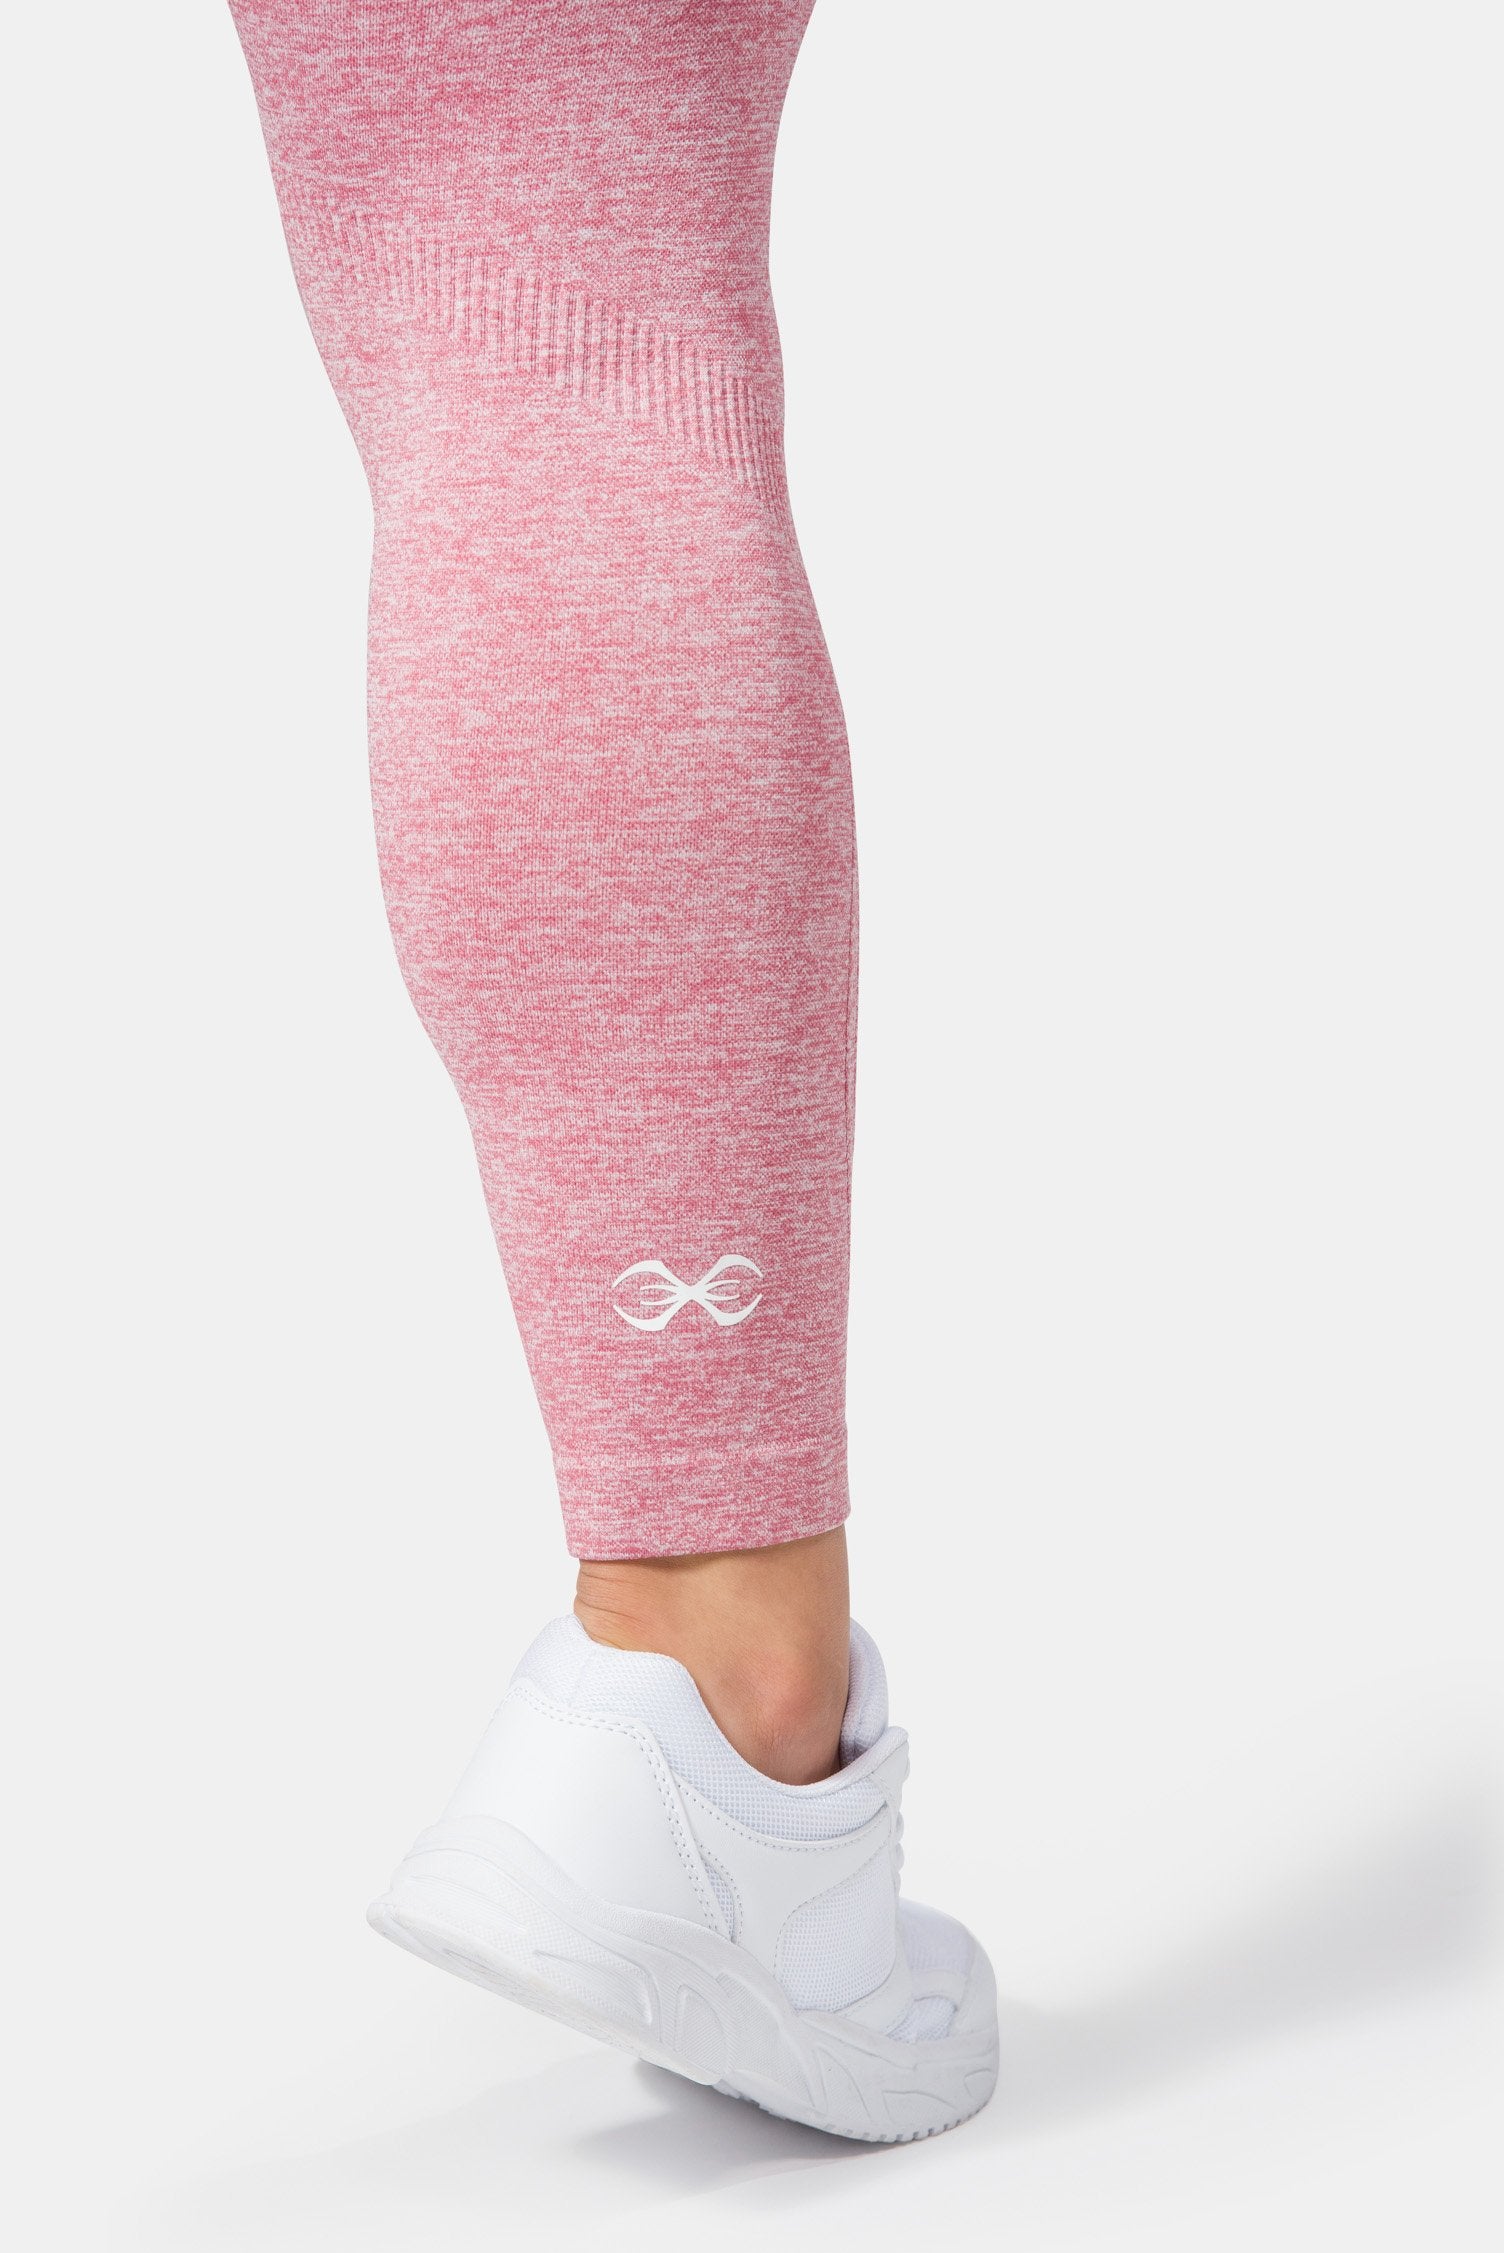 Is That The New Seamless Marled Knit Sports Leggings ??